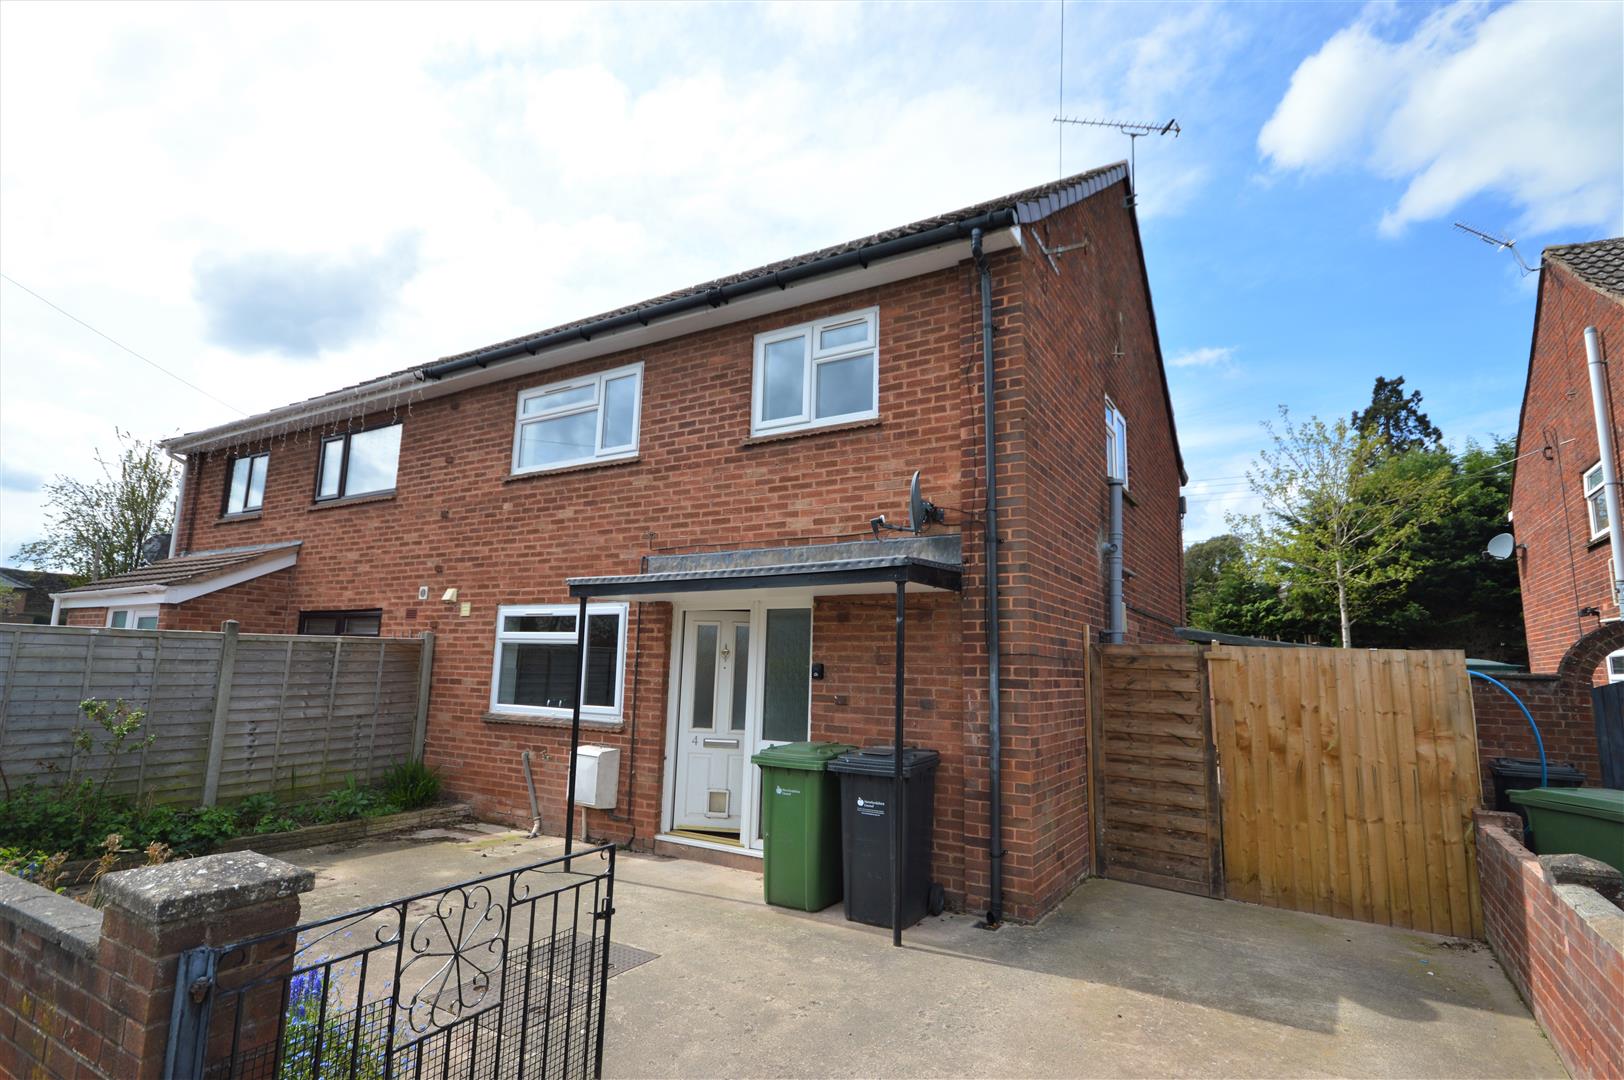 3 bed semi-detached for sale in Moreton-On-Lugg, HR4